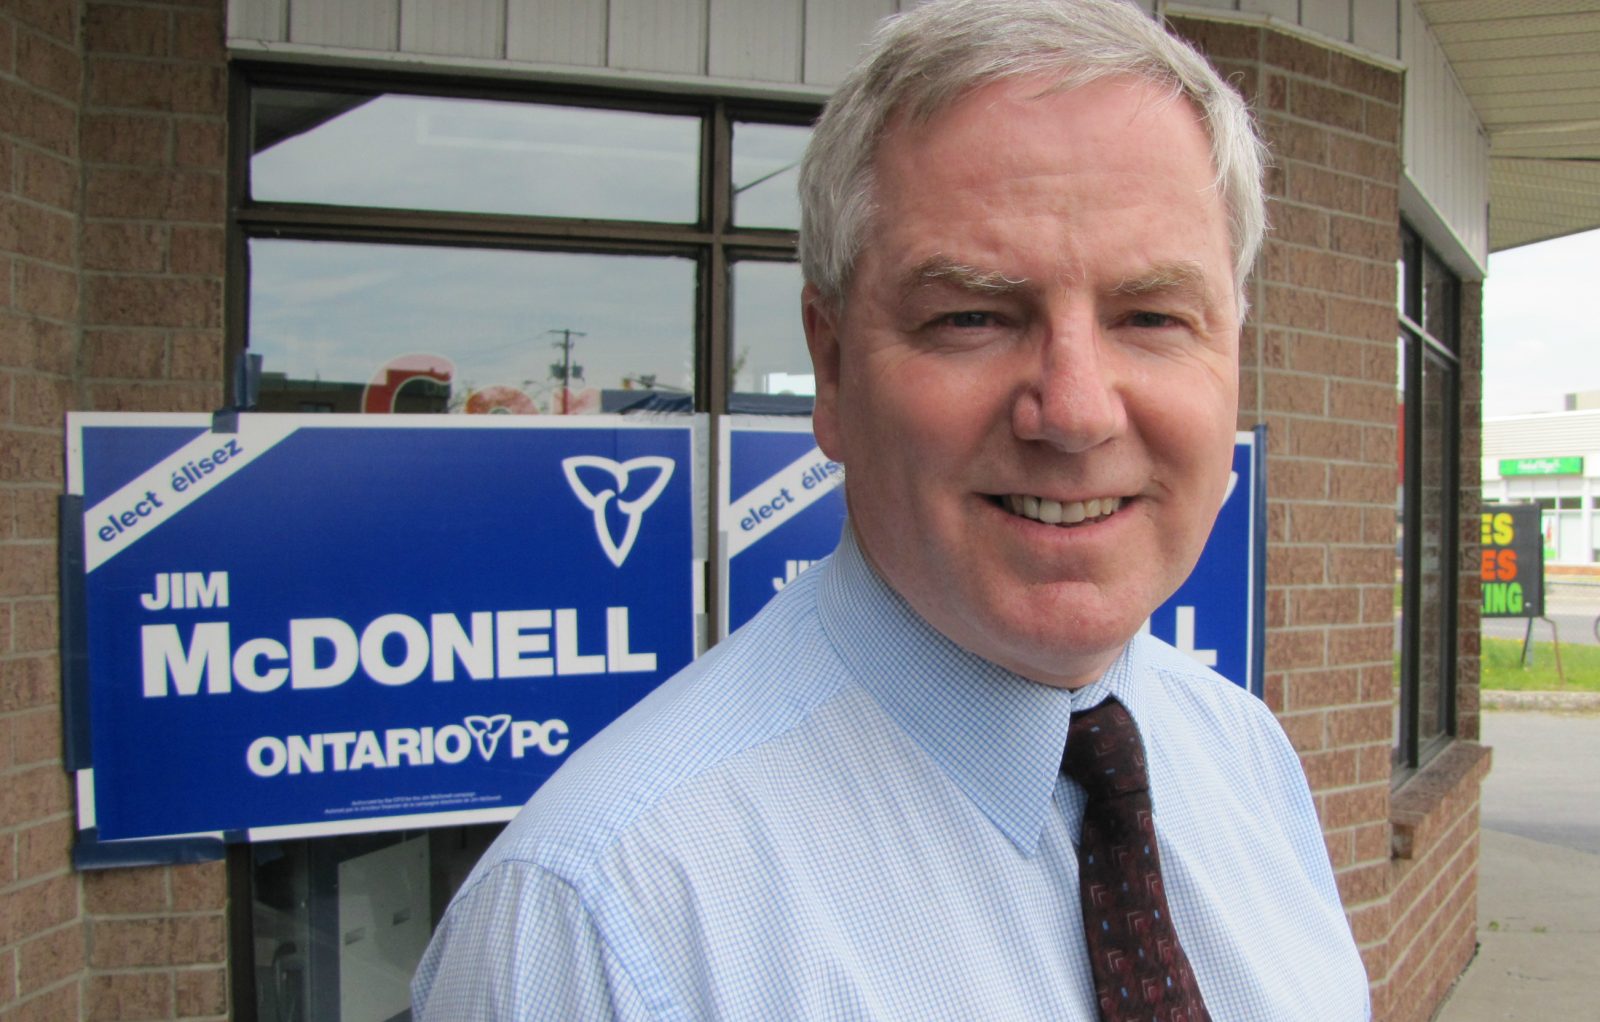 Jim McDonell accuses LHIN of not providing enough beds for local seniors